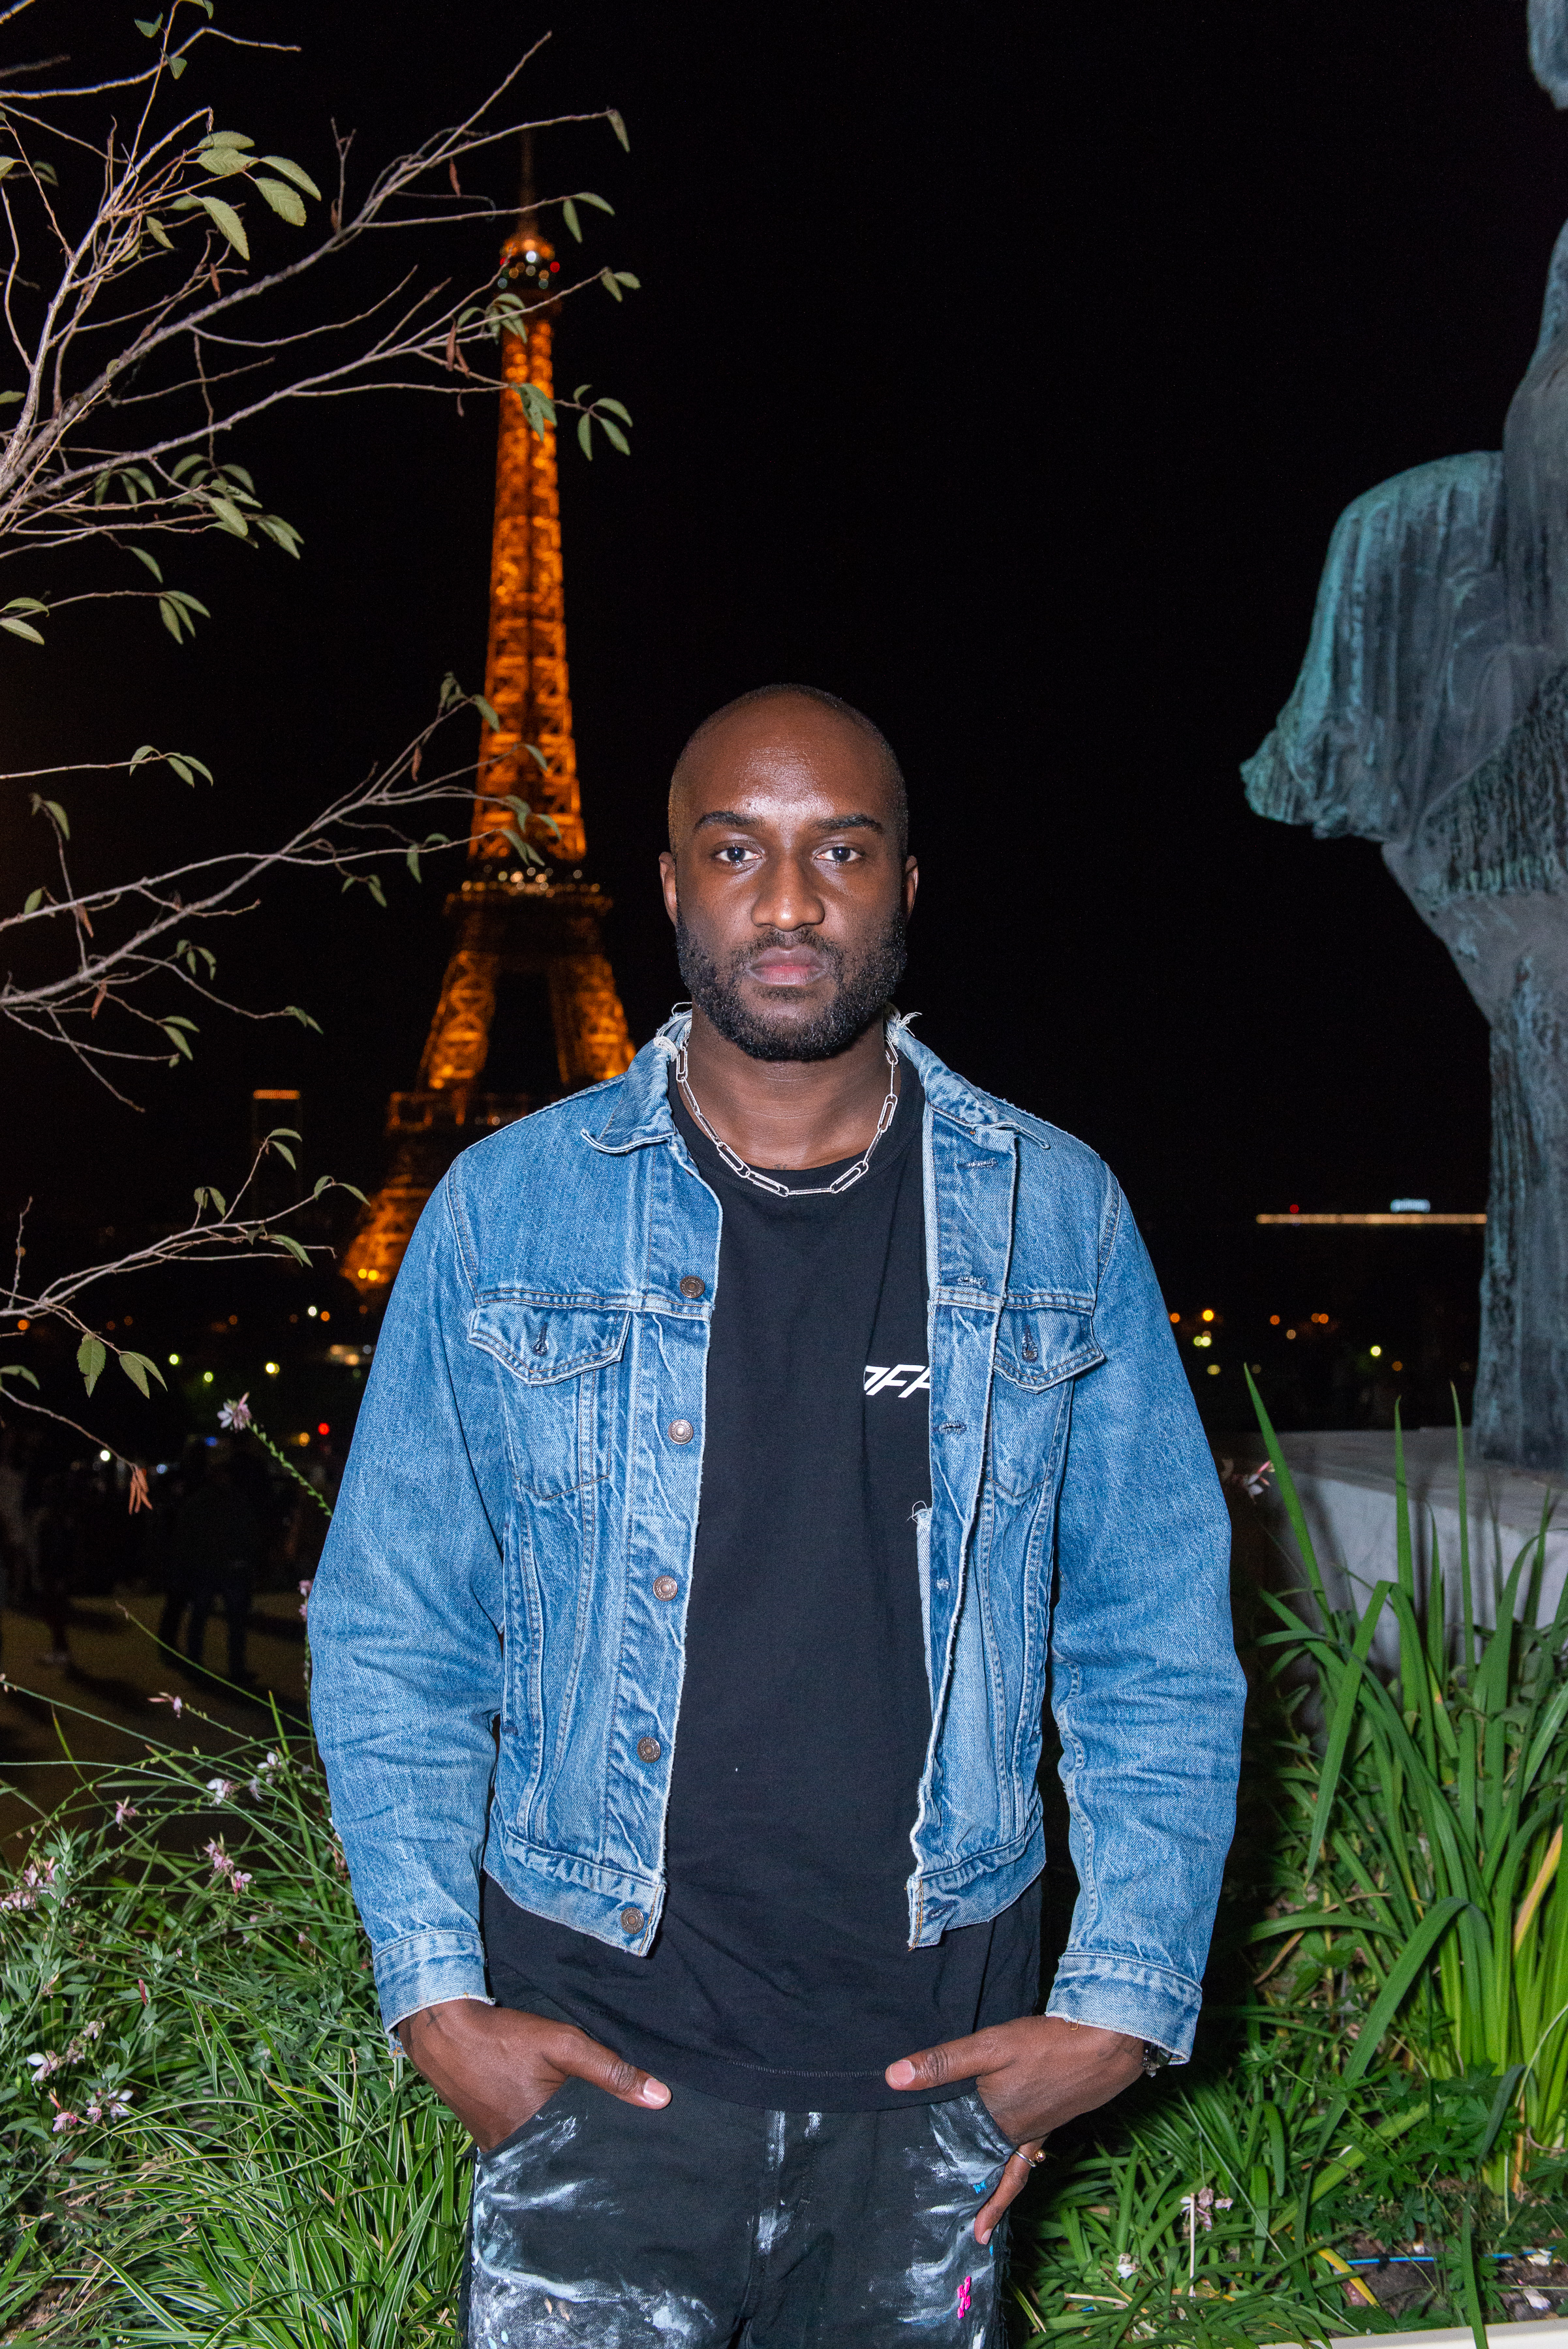 In Honor of Virgil Abloh, Here Are Three Black Fashion Designers